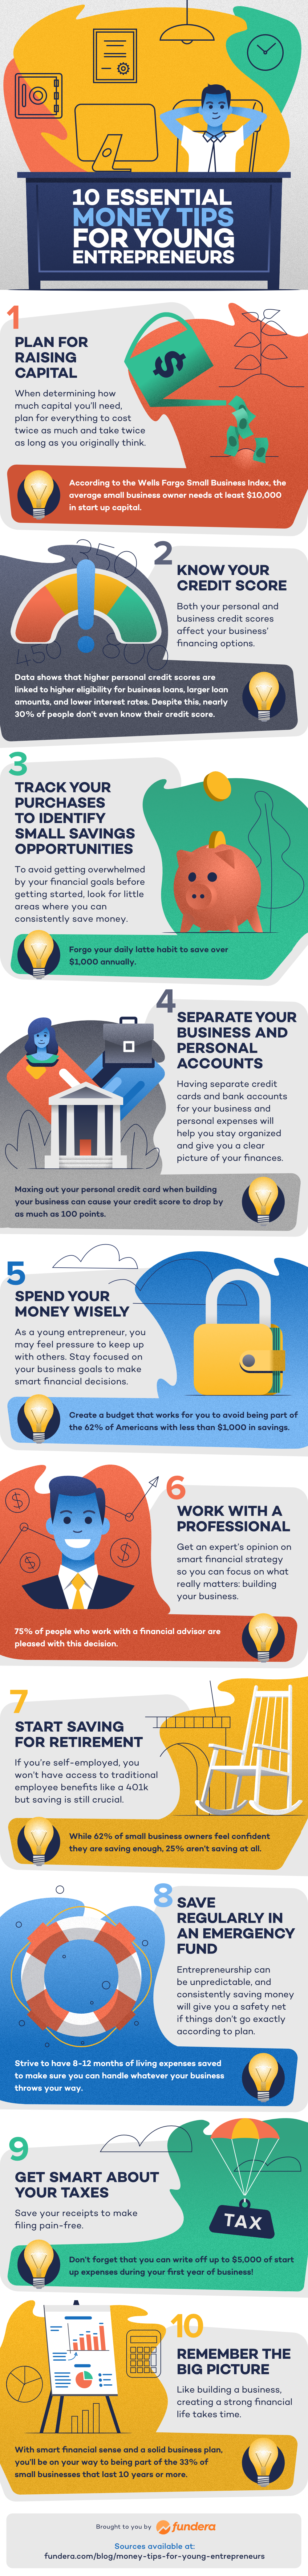 Infographic: 10 Essential Money Tips For Young Entrepreneurs